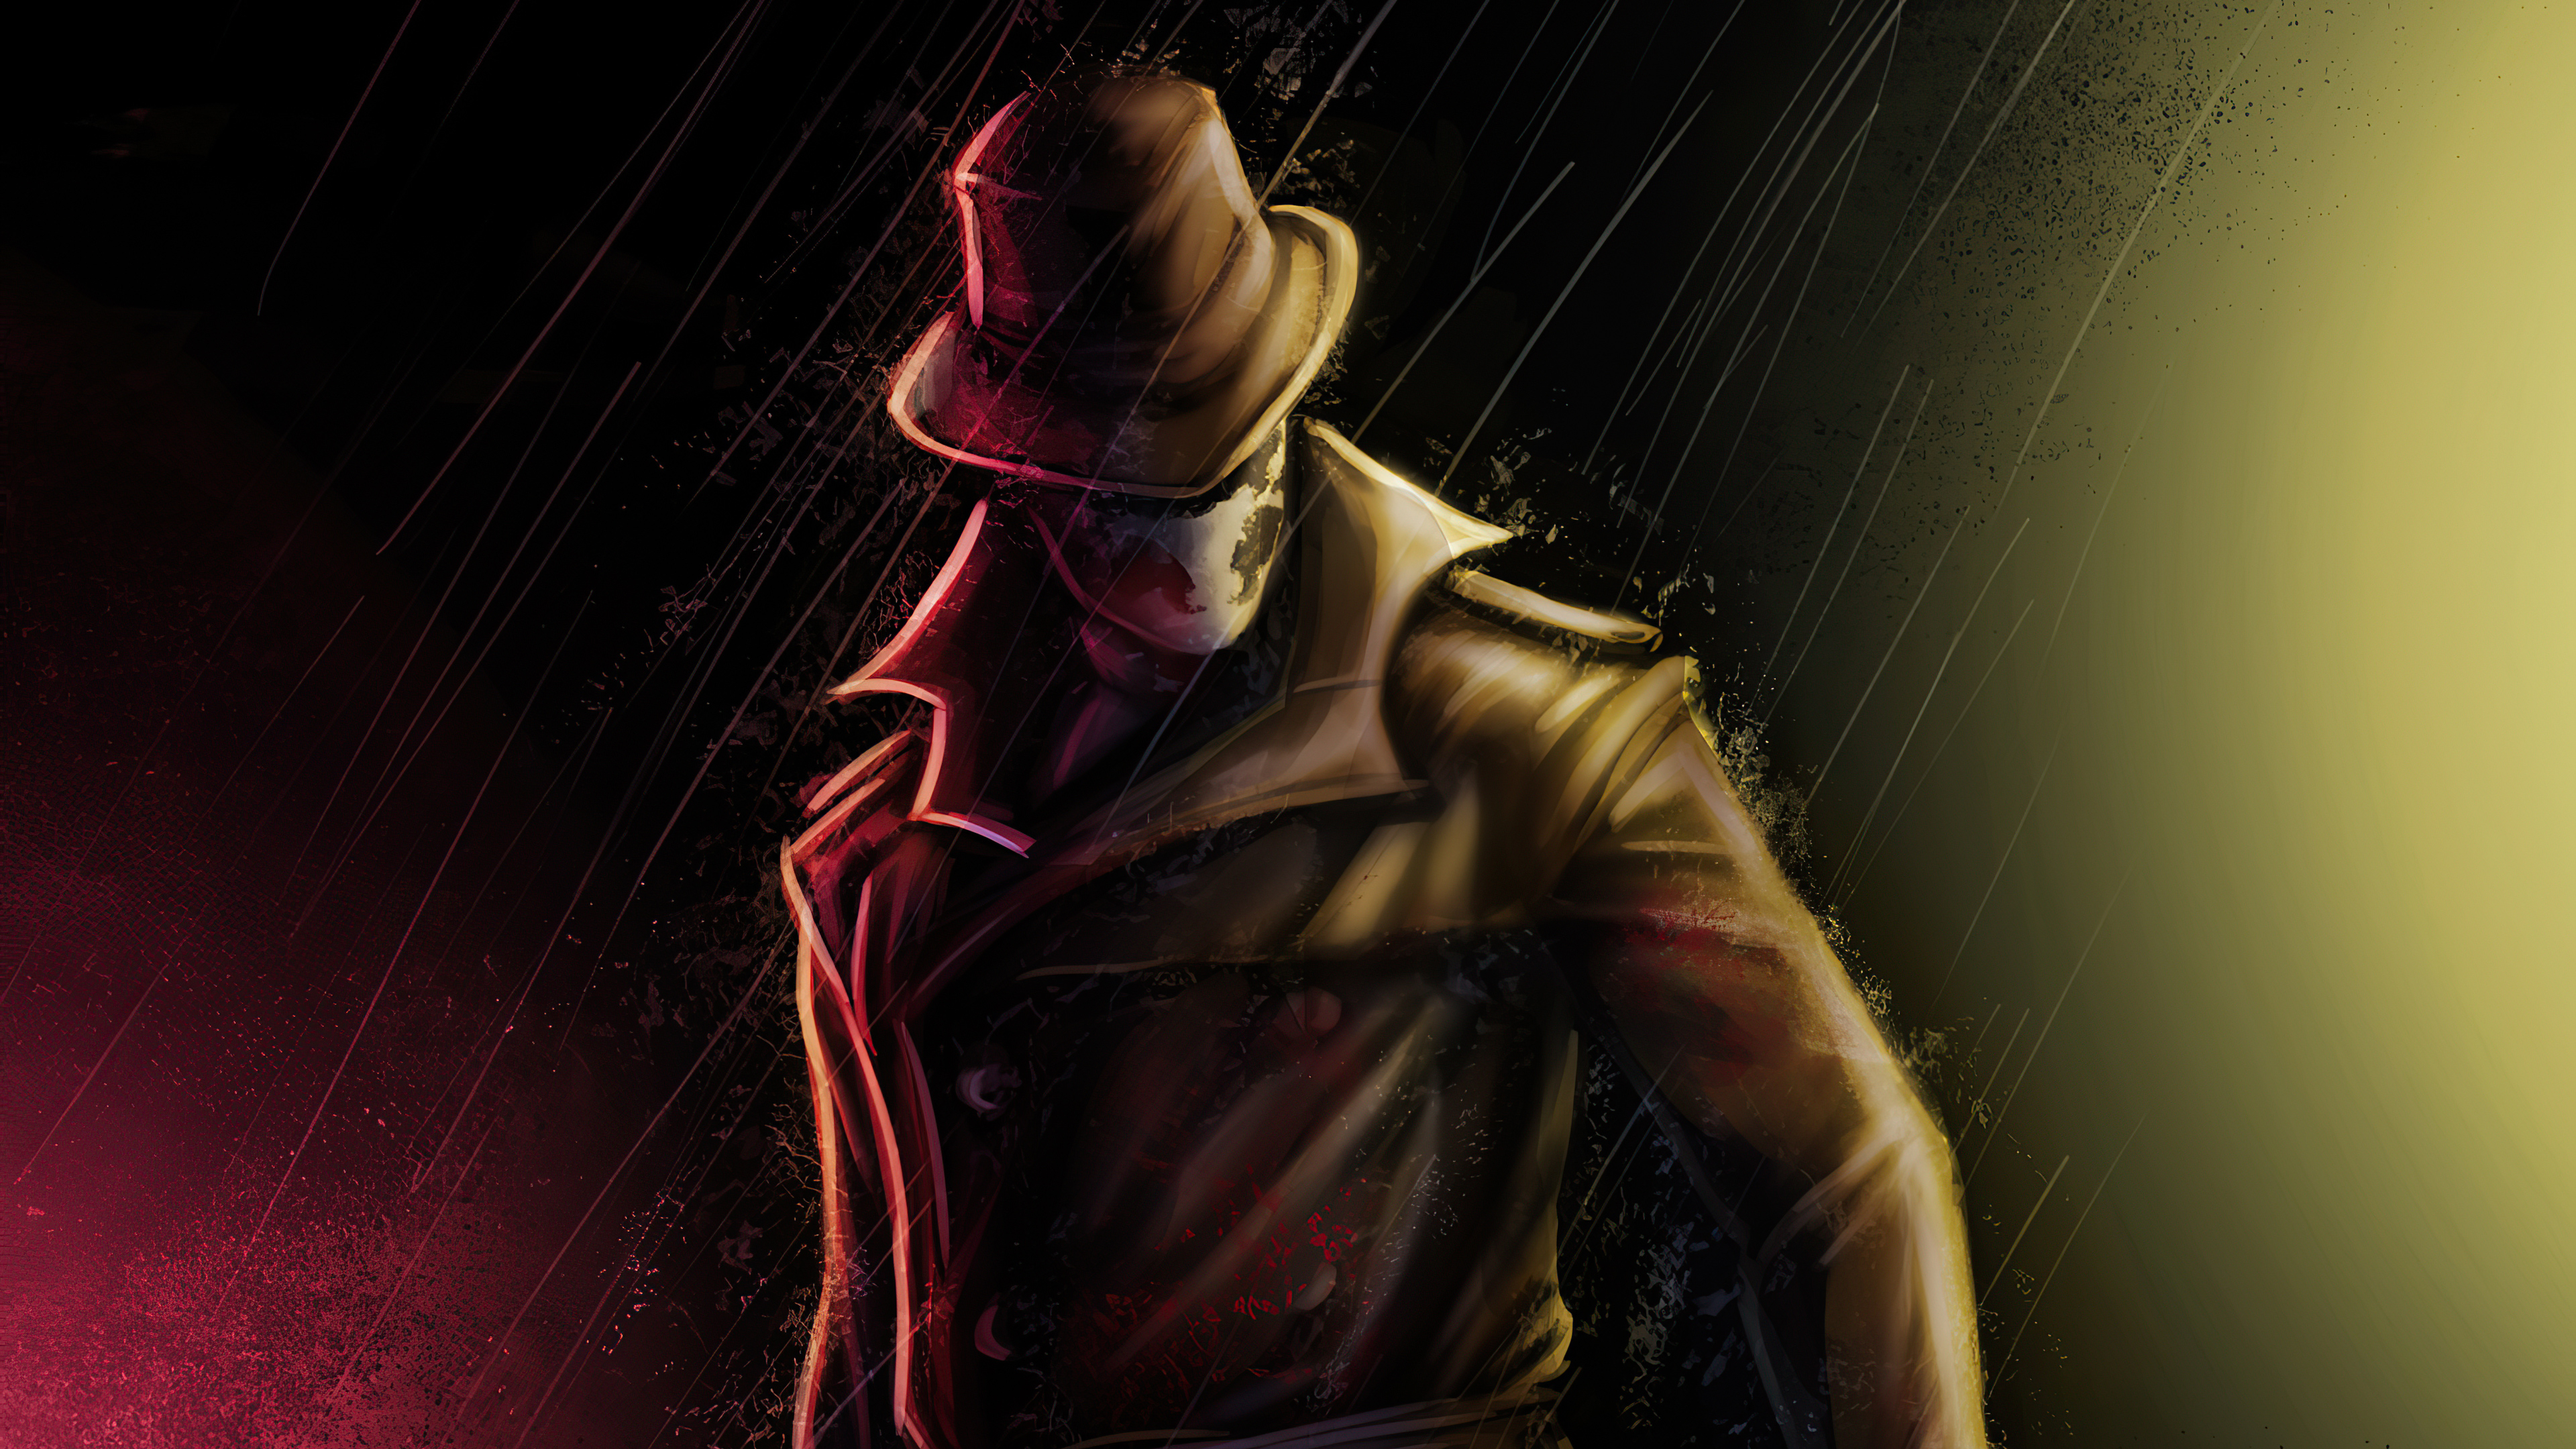 3840x2160 Rorschach Watchman Artwork 4k, HD Artist, 4k Wallpapers, Images, Backgrounds, Photos and Pictures